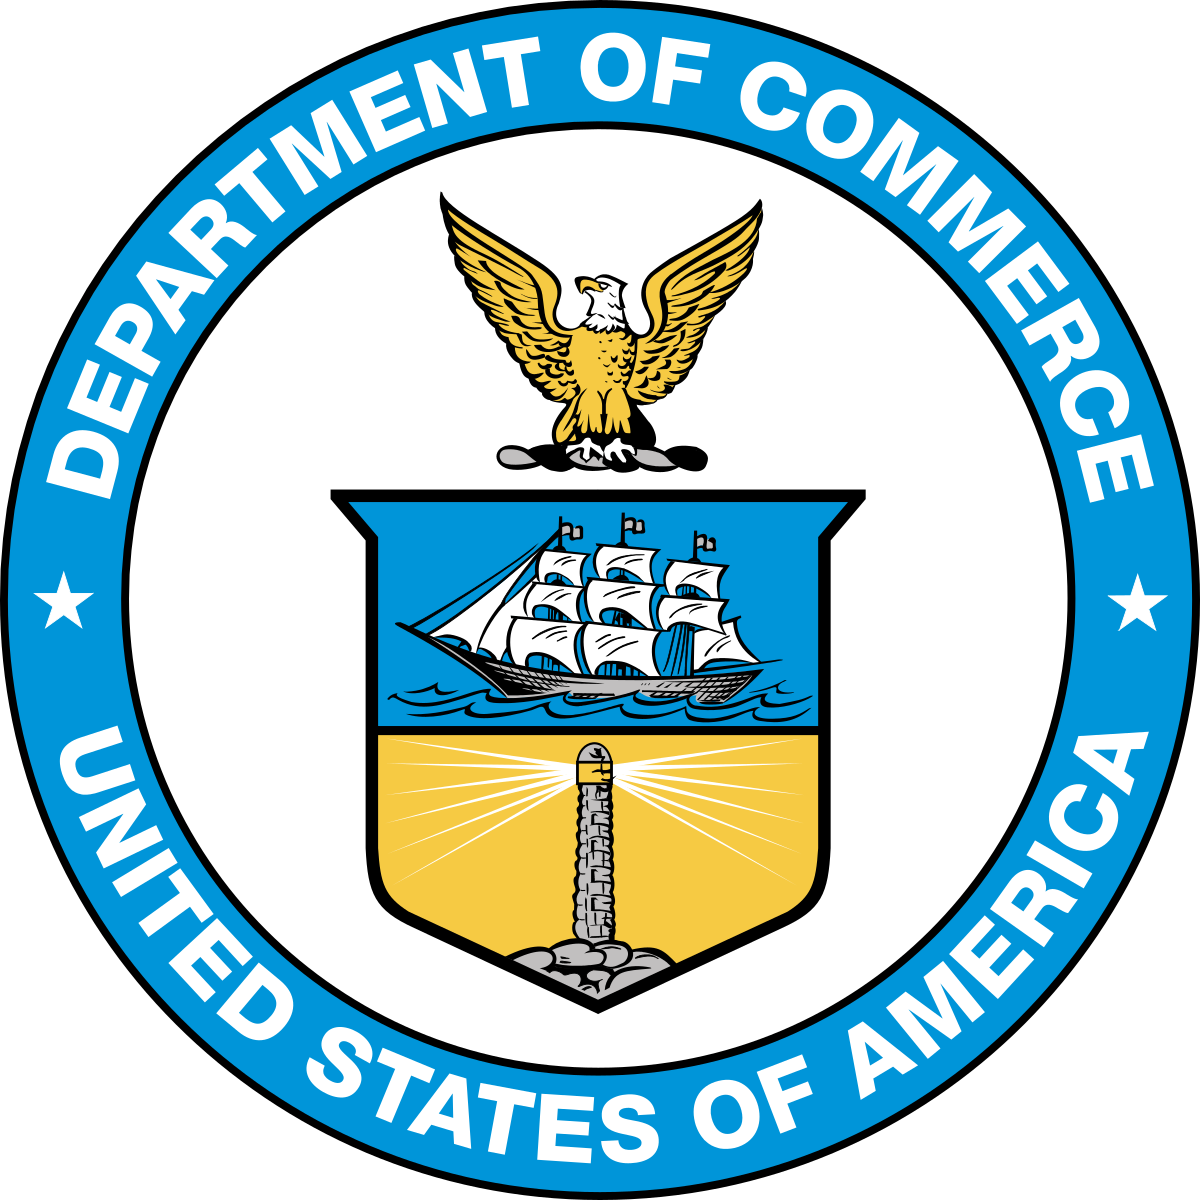 https://upload.wikimedia.org/wikipedia/commons/thumb/1/1a/Seal_of_the_United_States_Department_of_Commerce.svg/1200px-Seal_of_the_United_States_Department_of_Commerce.svg.png